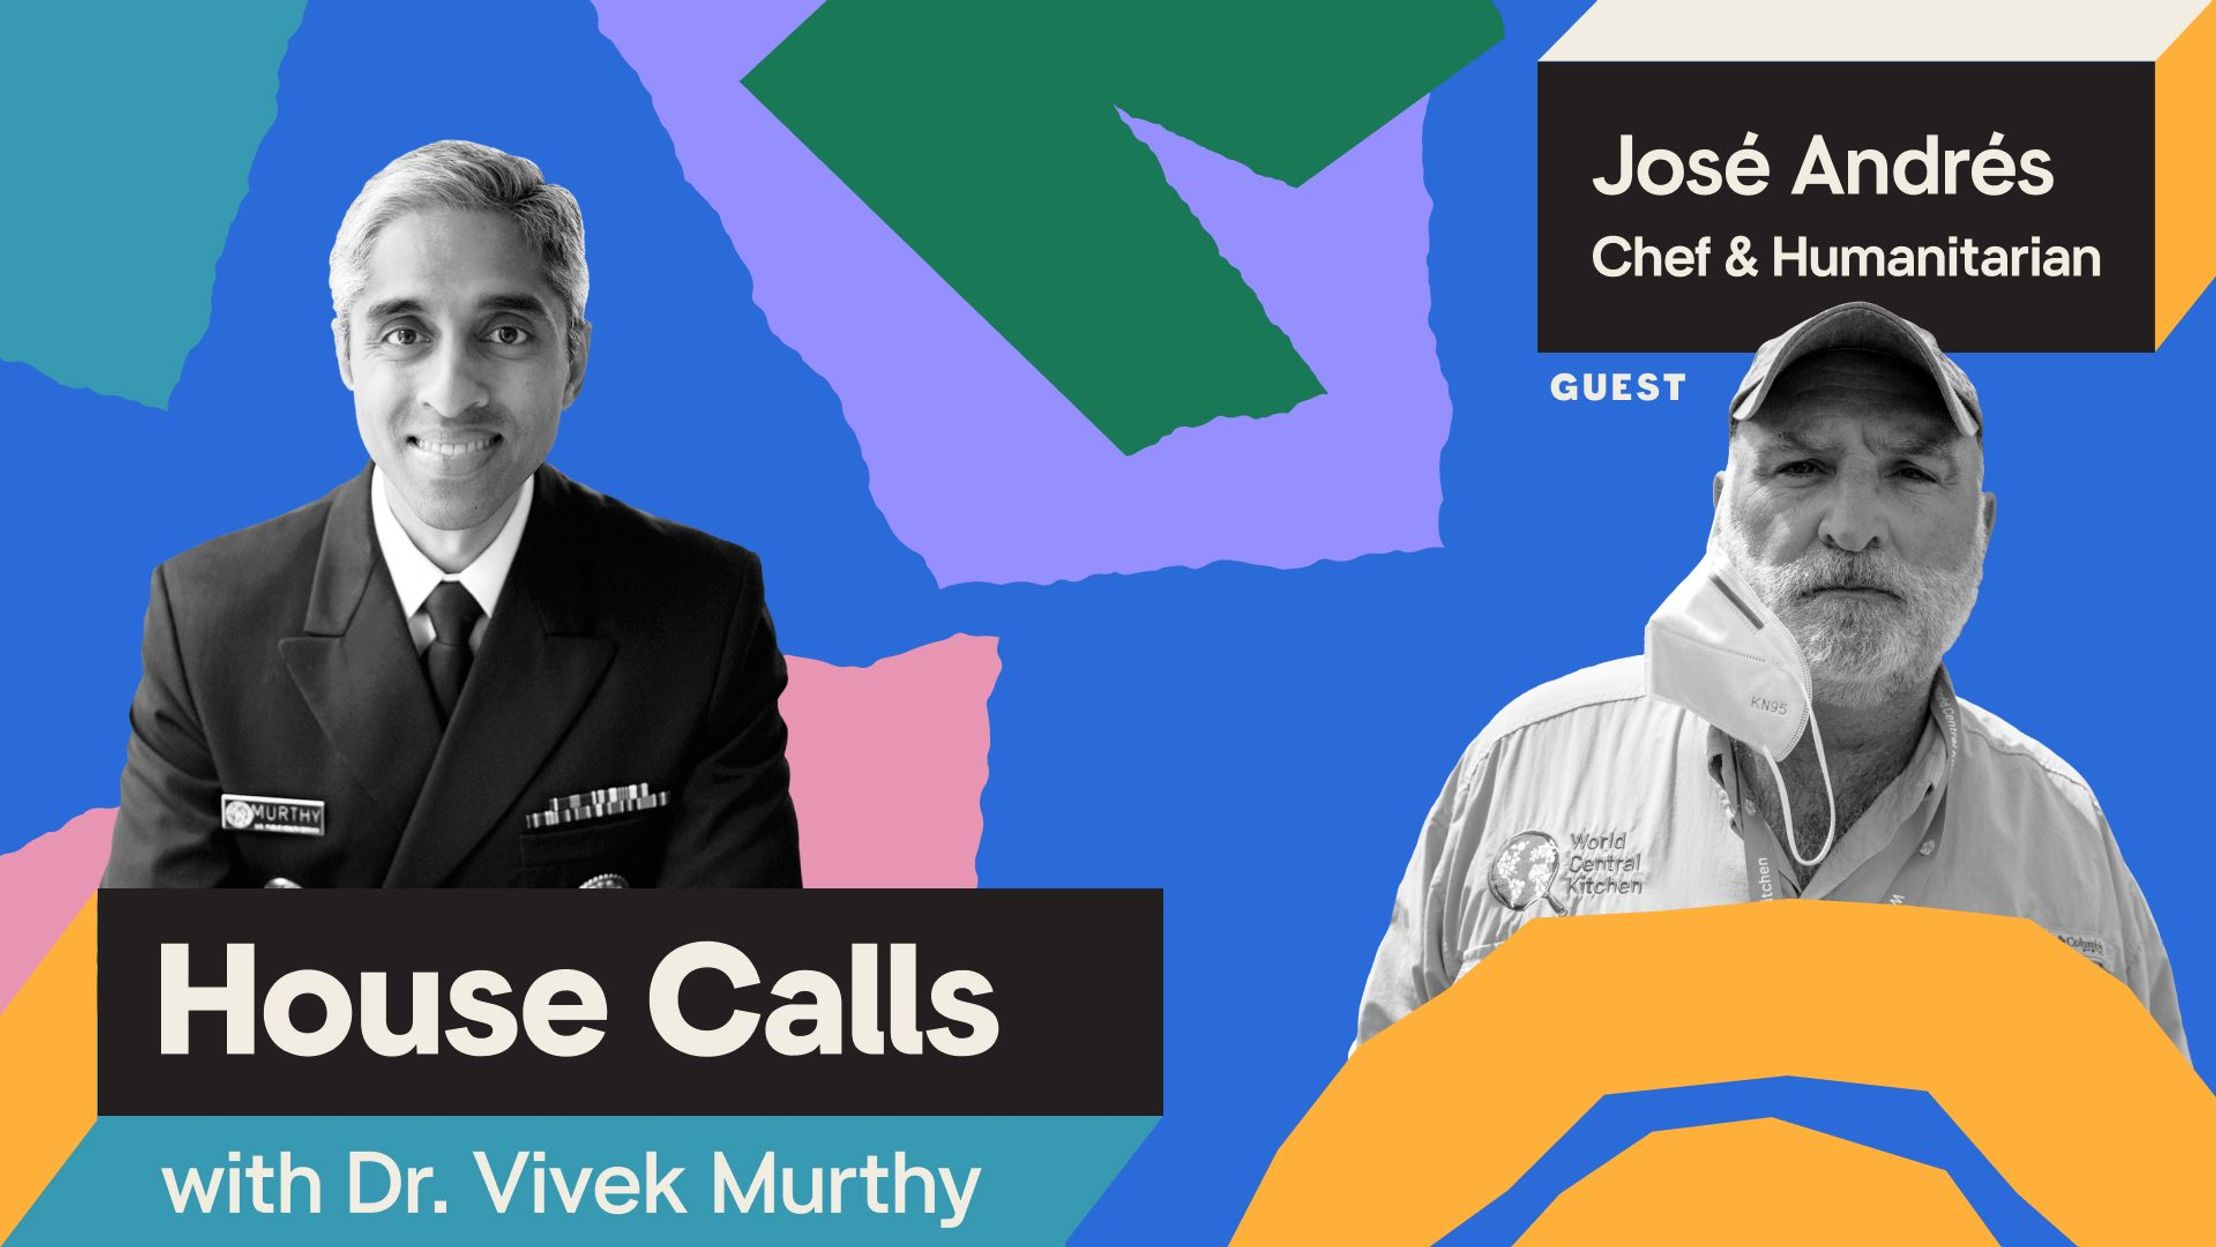 Black and white portraits of Surgeon General Vivek Murthy and José Andrés with a colorful background.